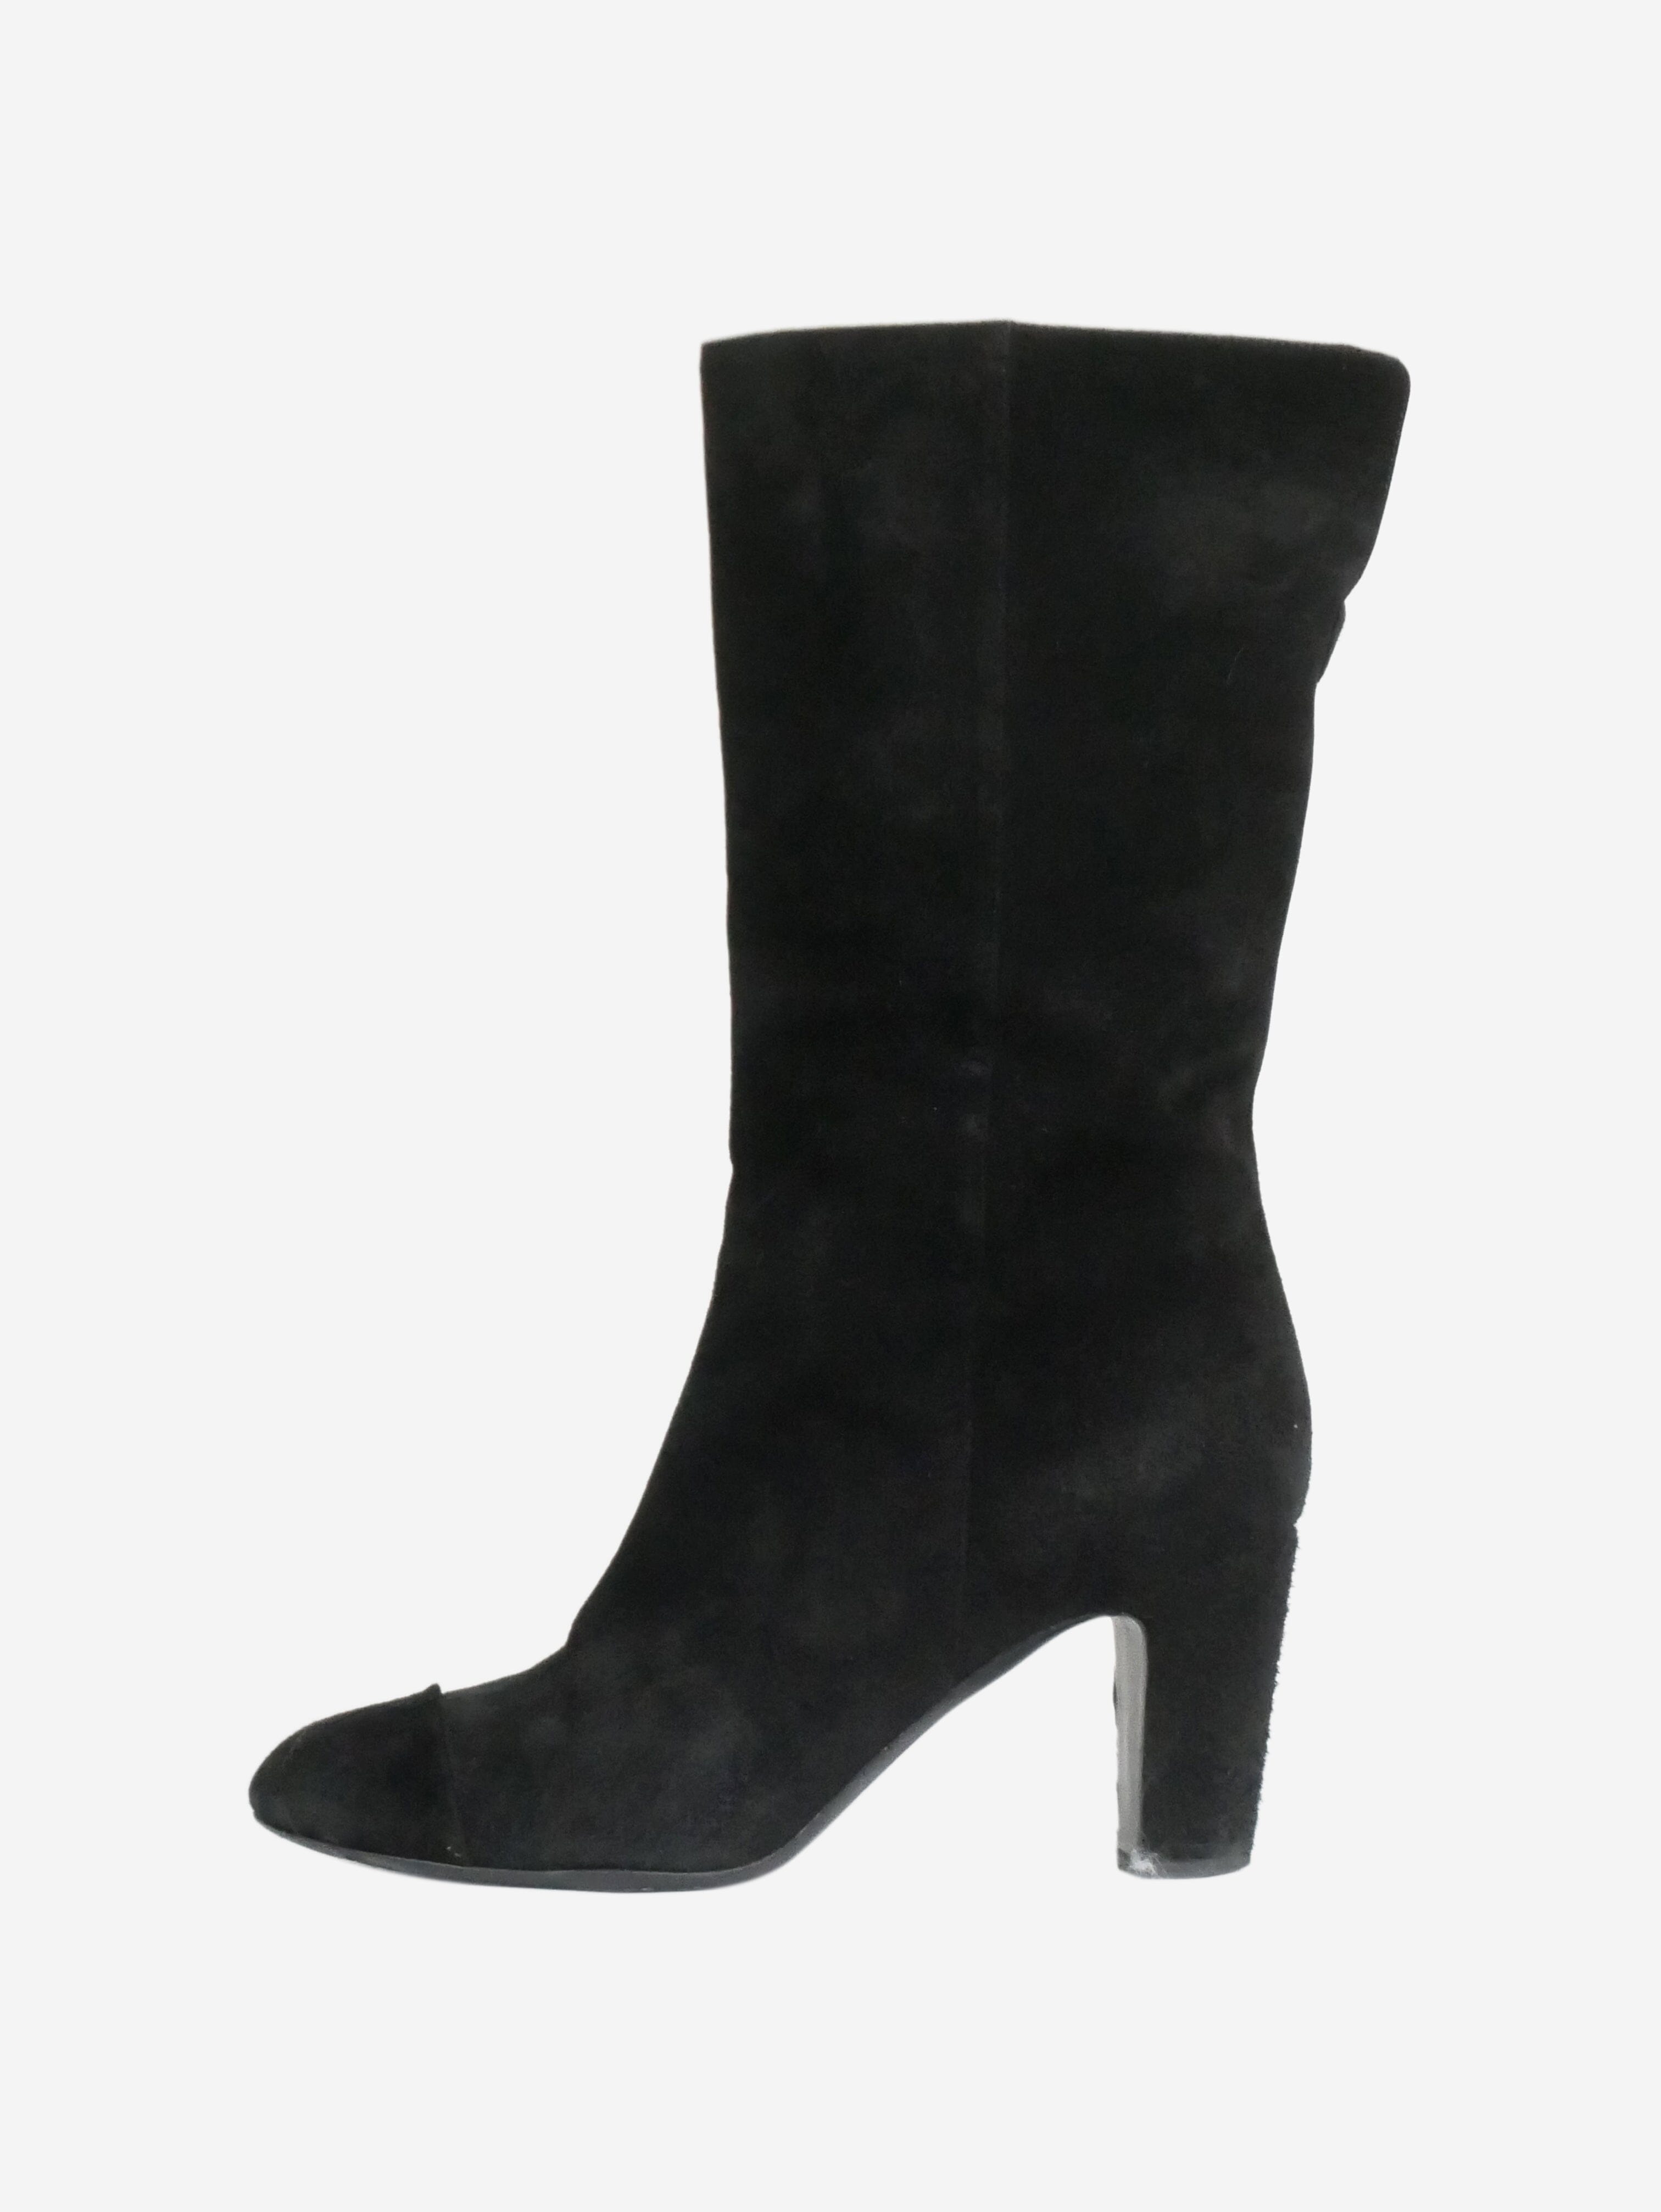 Chanel pre-owned black leather ankle boots